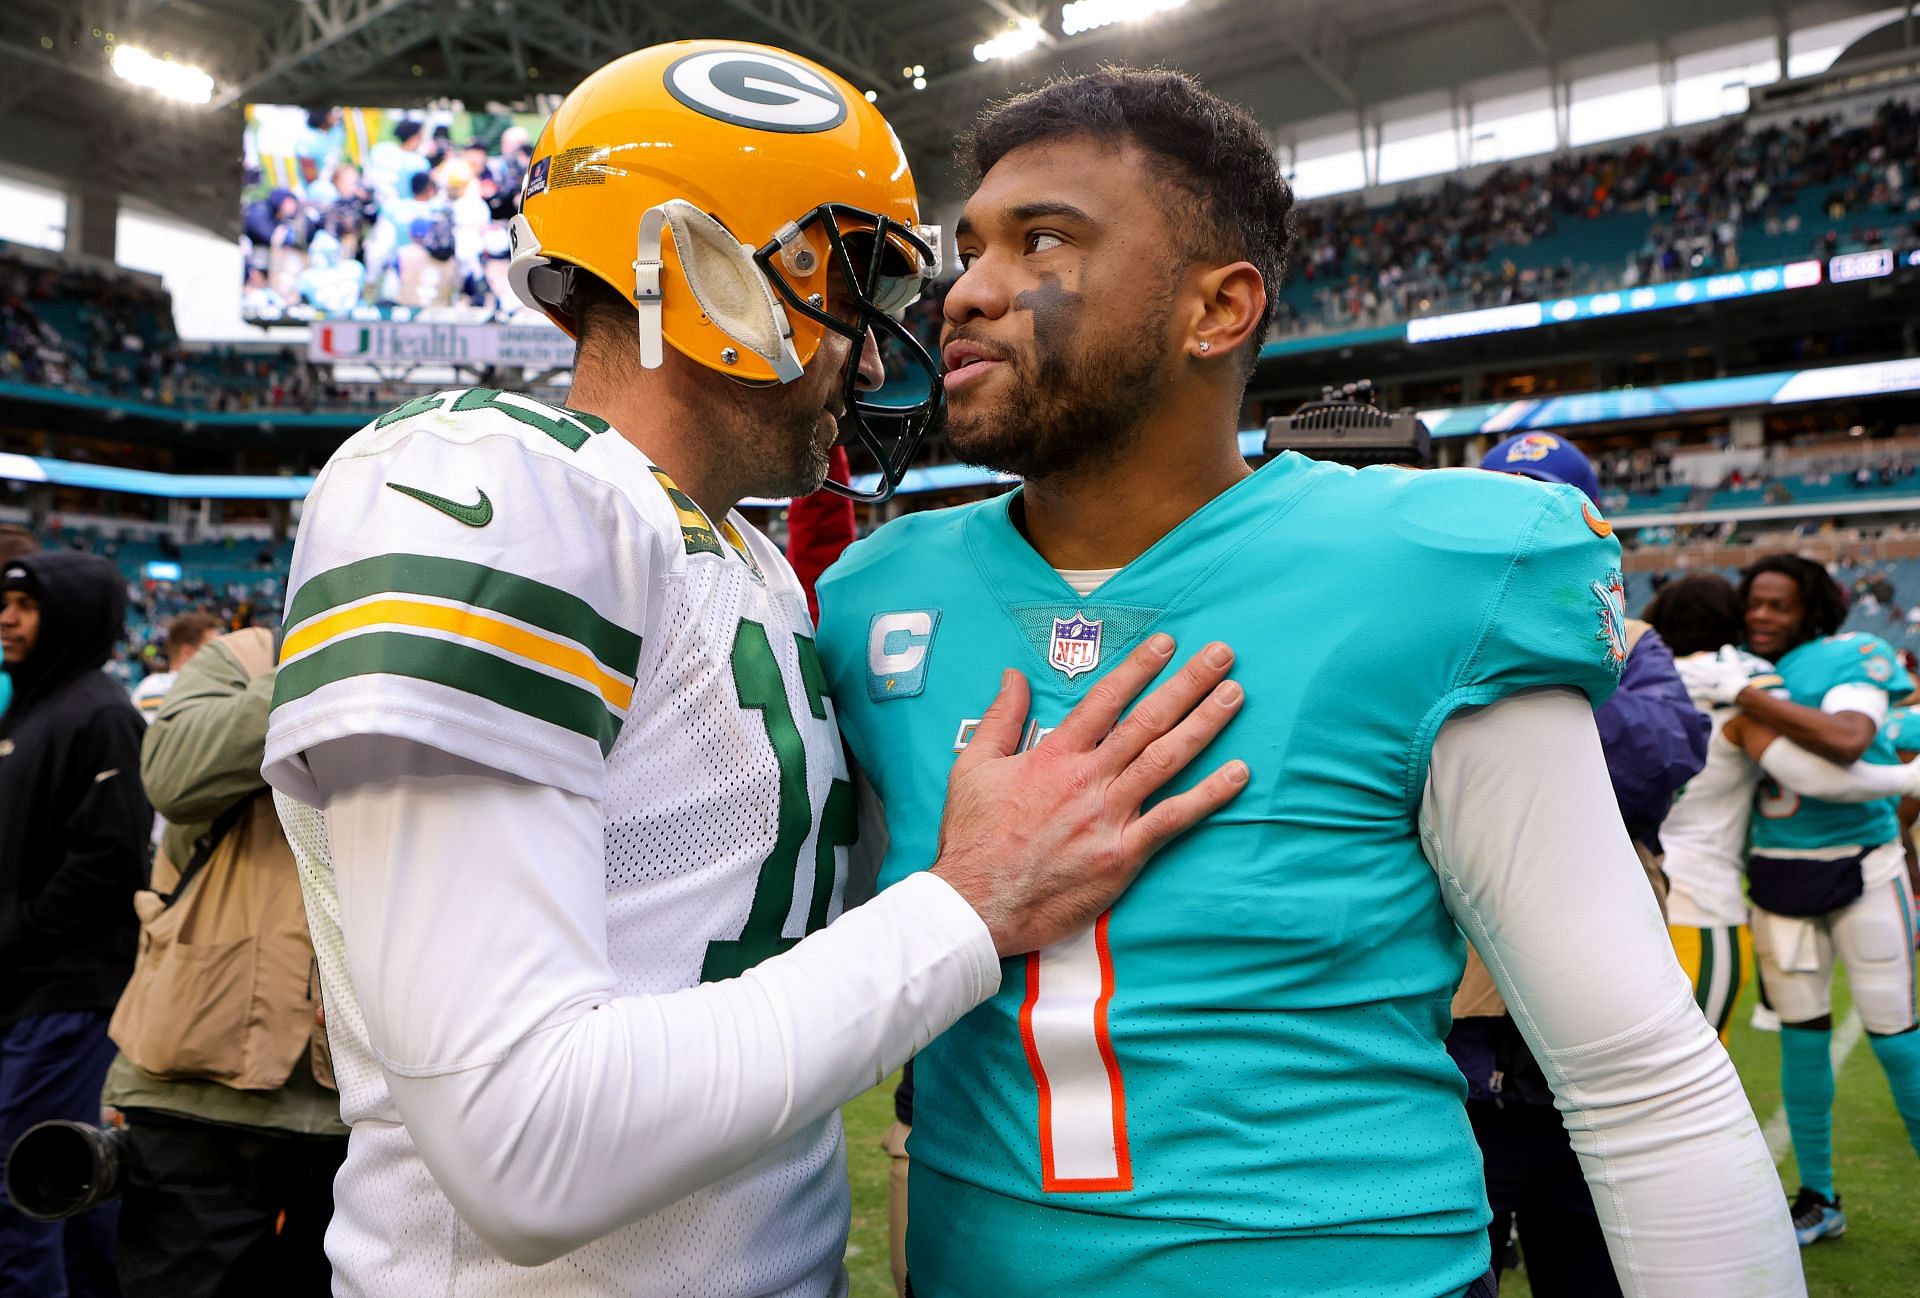 Packers vs. Dolphins Week 16 full coverage: Preview, in-game reactions, and  post-game recaps collection - The Phinsider